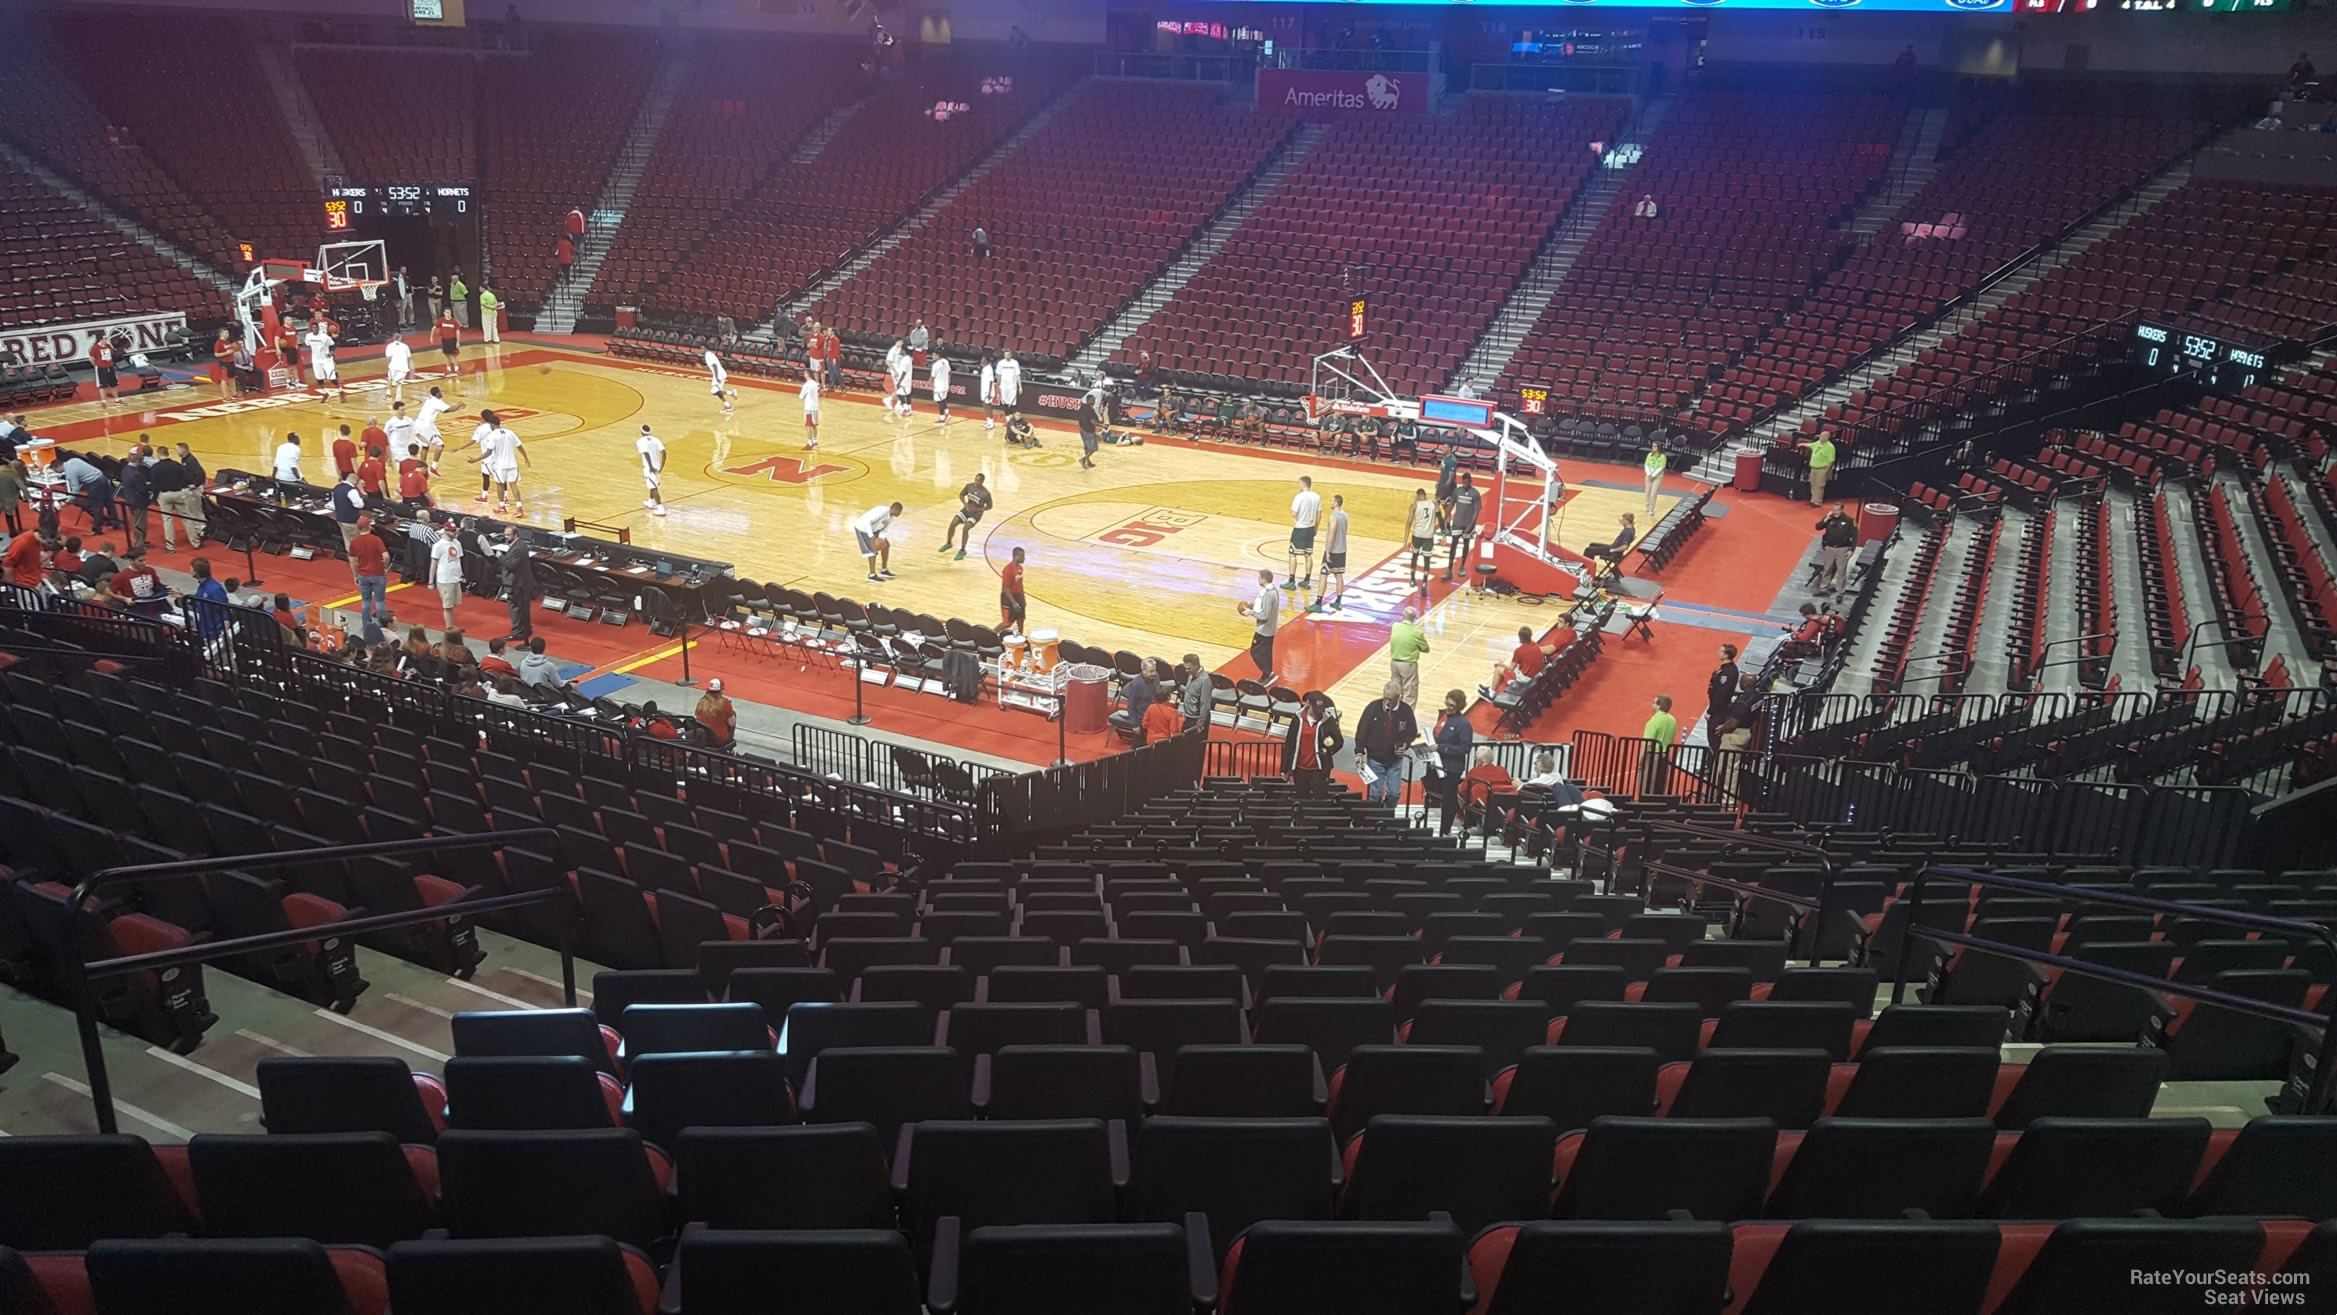 Pinnacle Bank Arena Seating Chart With Seat Numbers Cabinets Matttroy